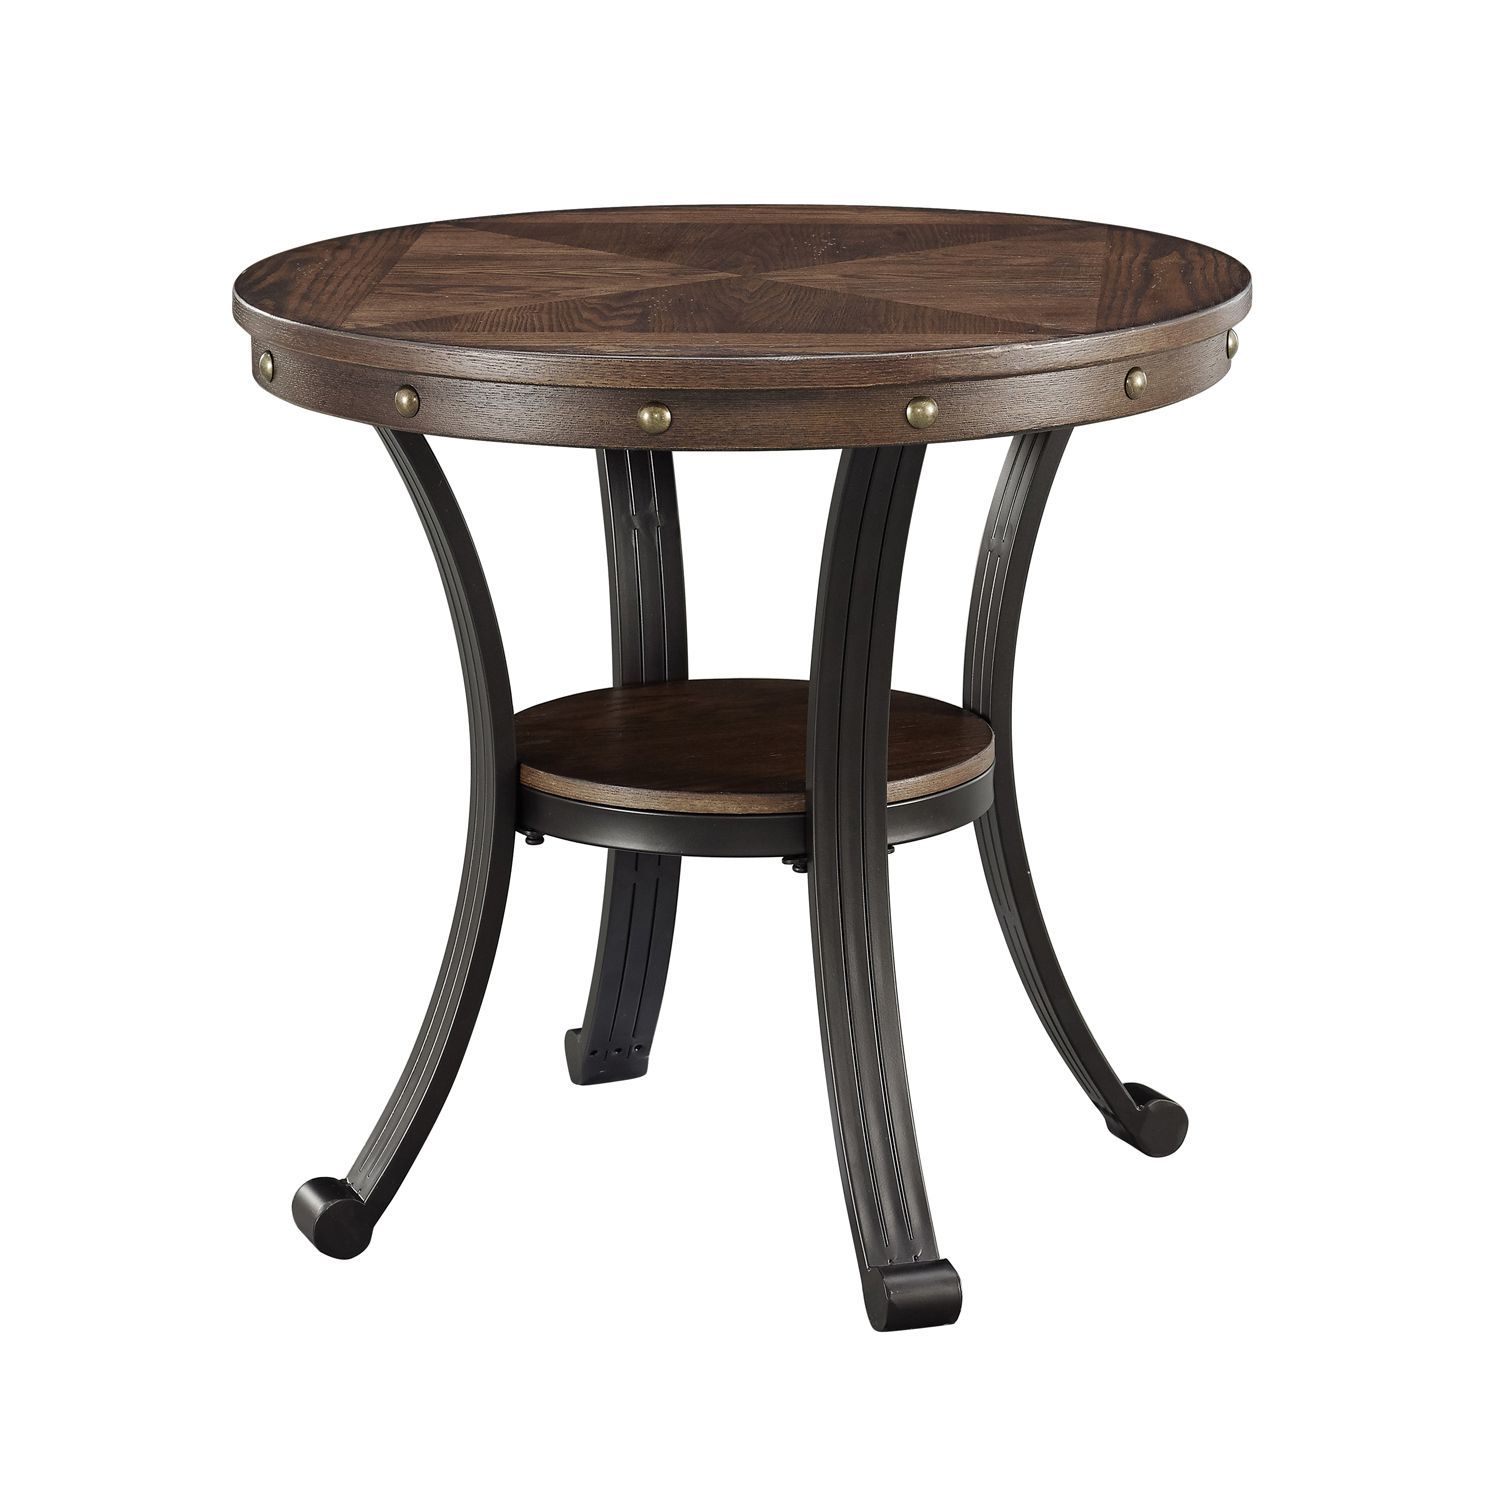 franklin oak woodgrain side table with nailheads living accent small porch piece room tables west elm chairs gold lamps dark brown entry dining clearance square metal end glass